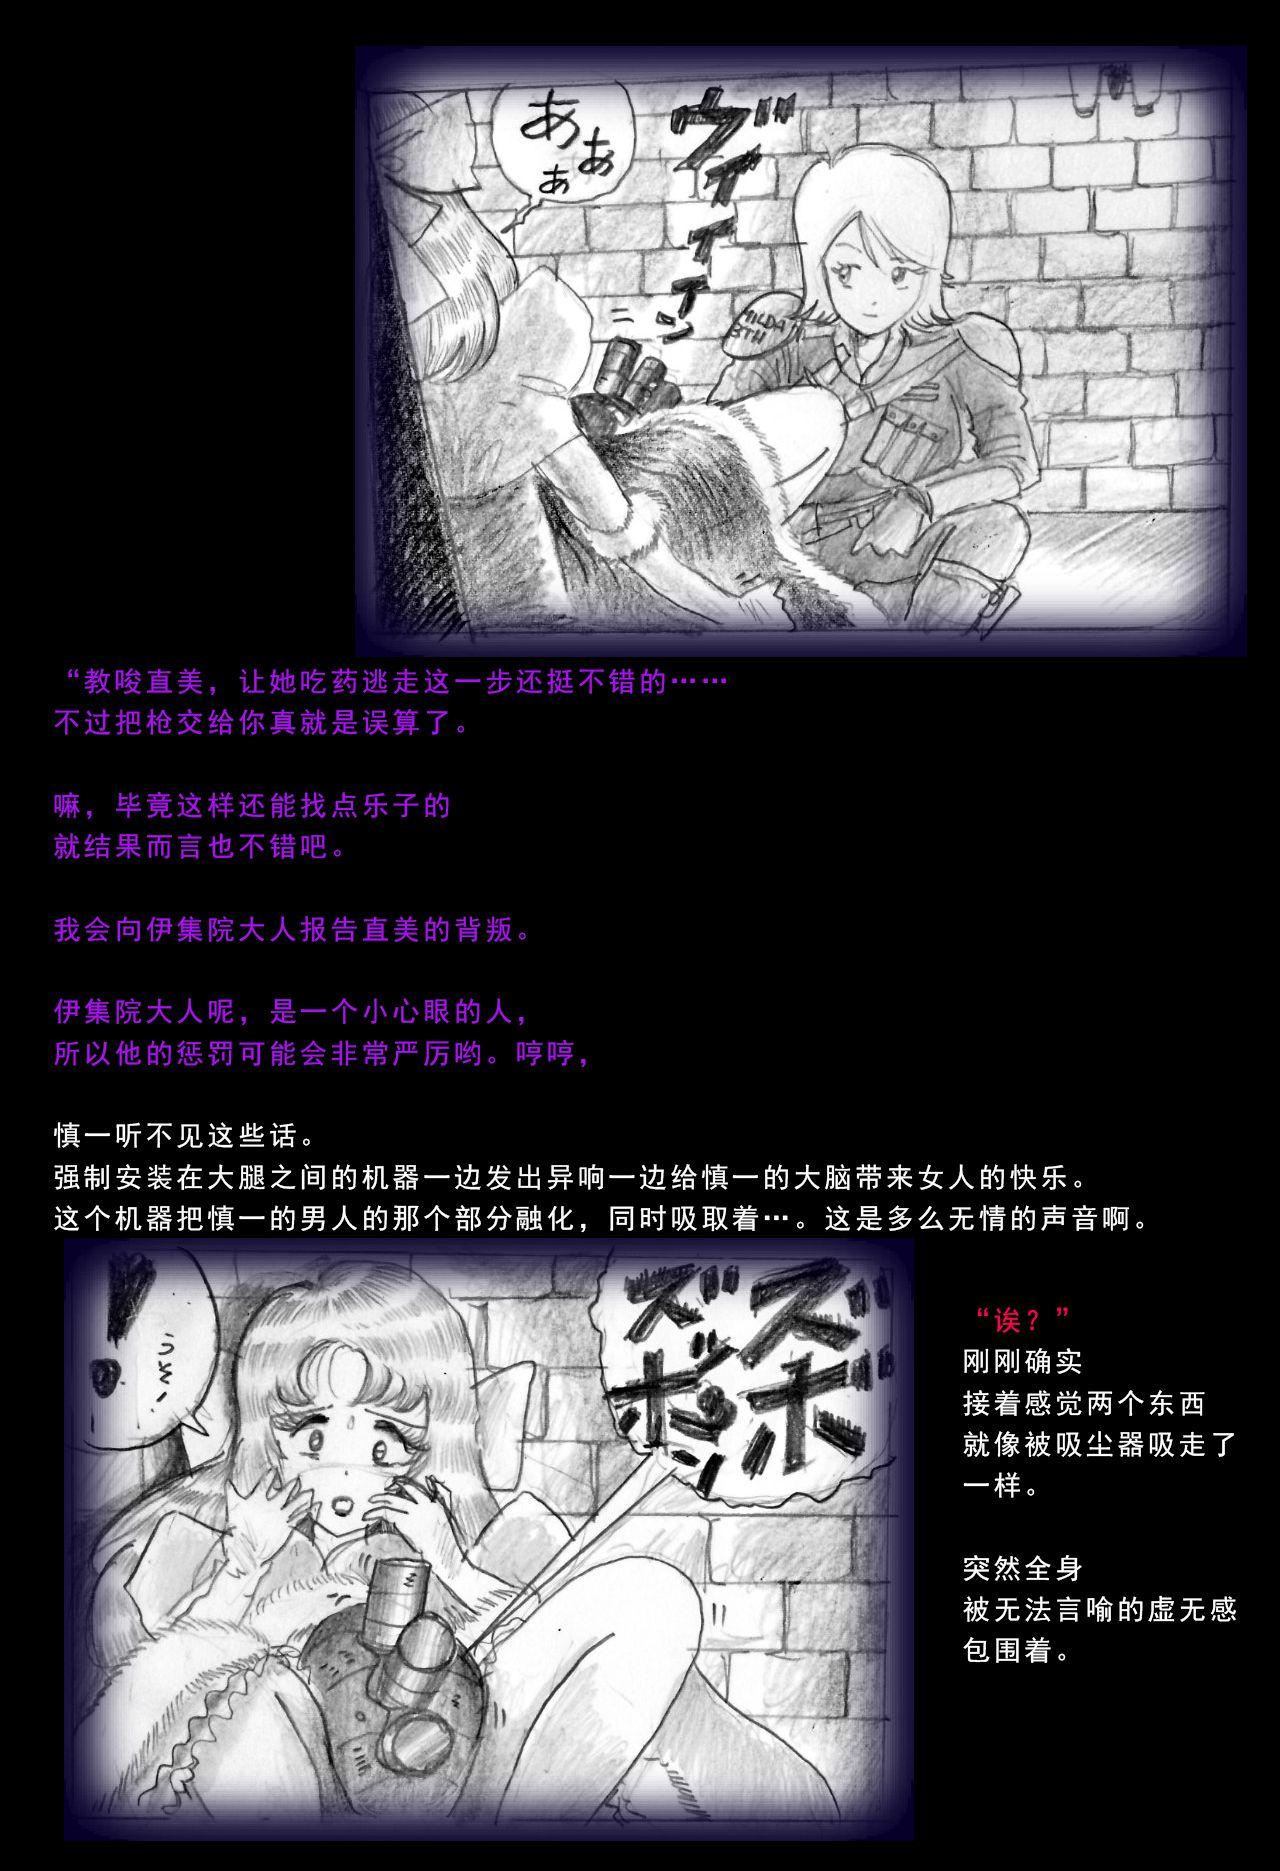 Special Police Third Platoon Captain Abduction Restraint Edition【chinese】 21